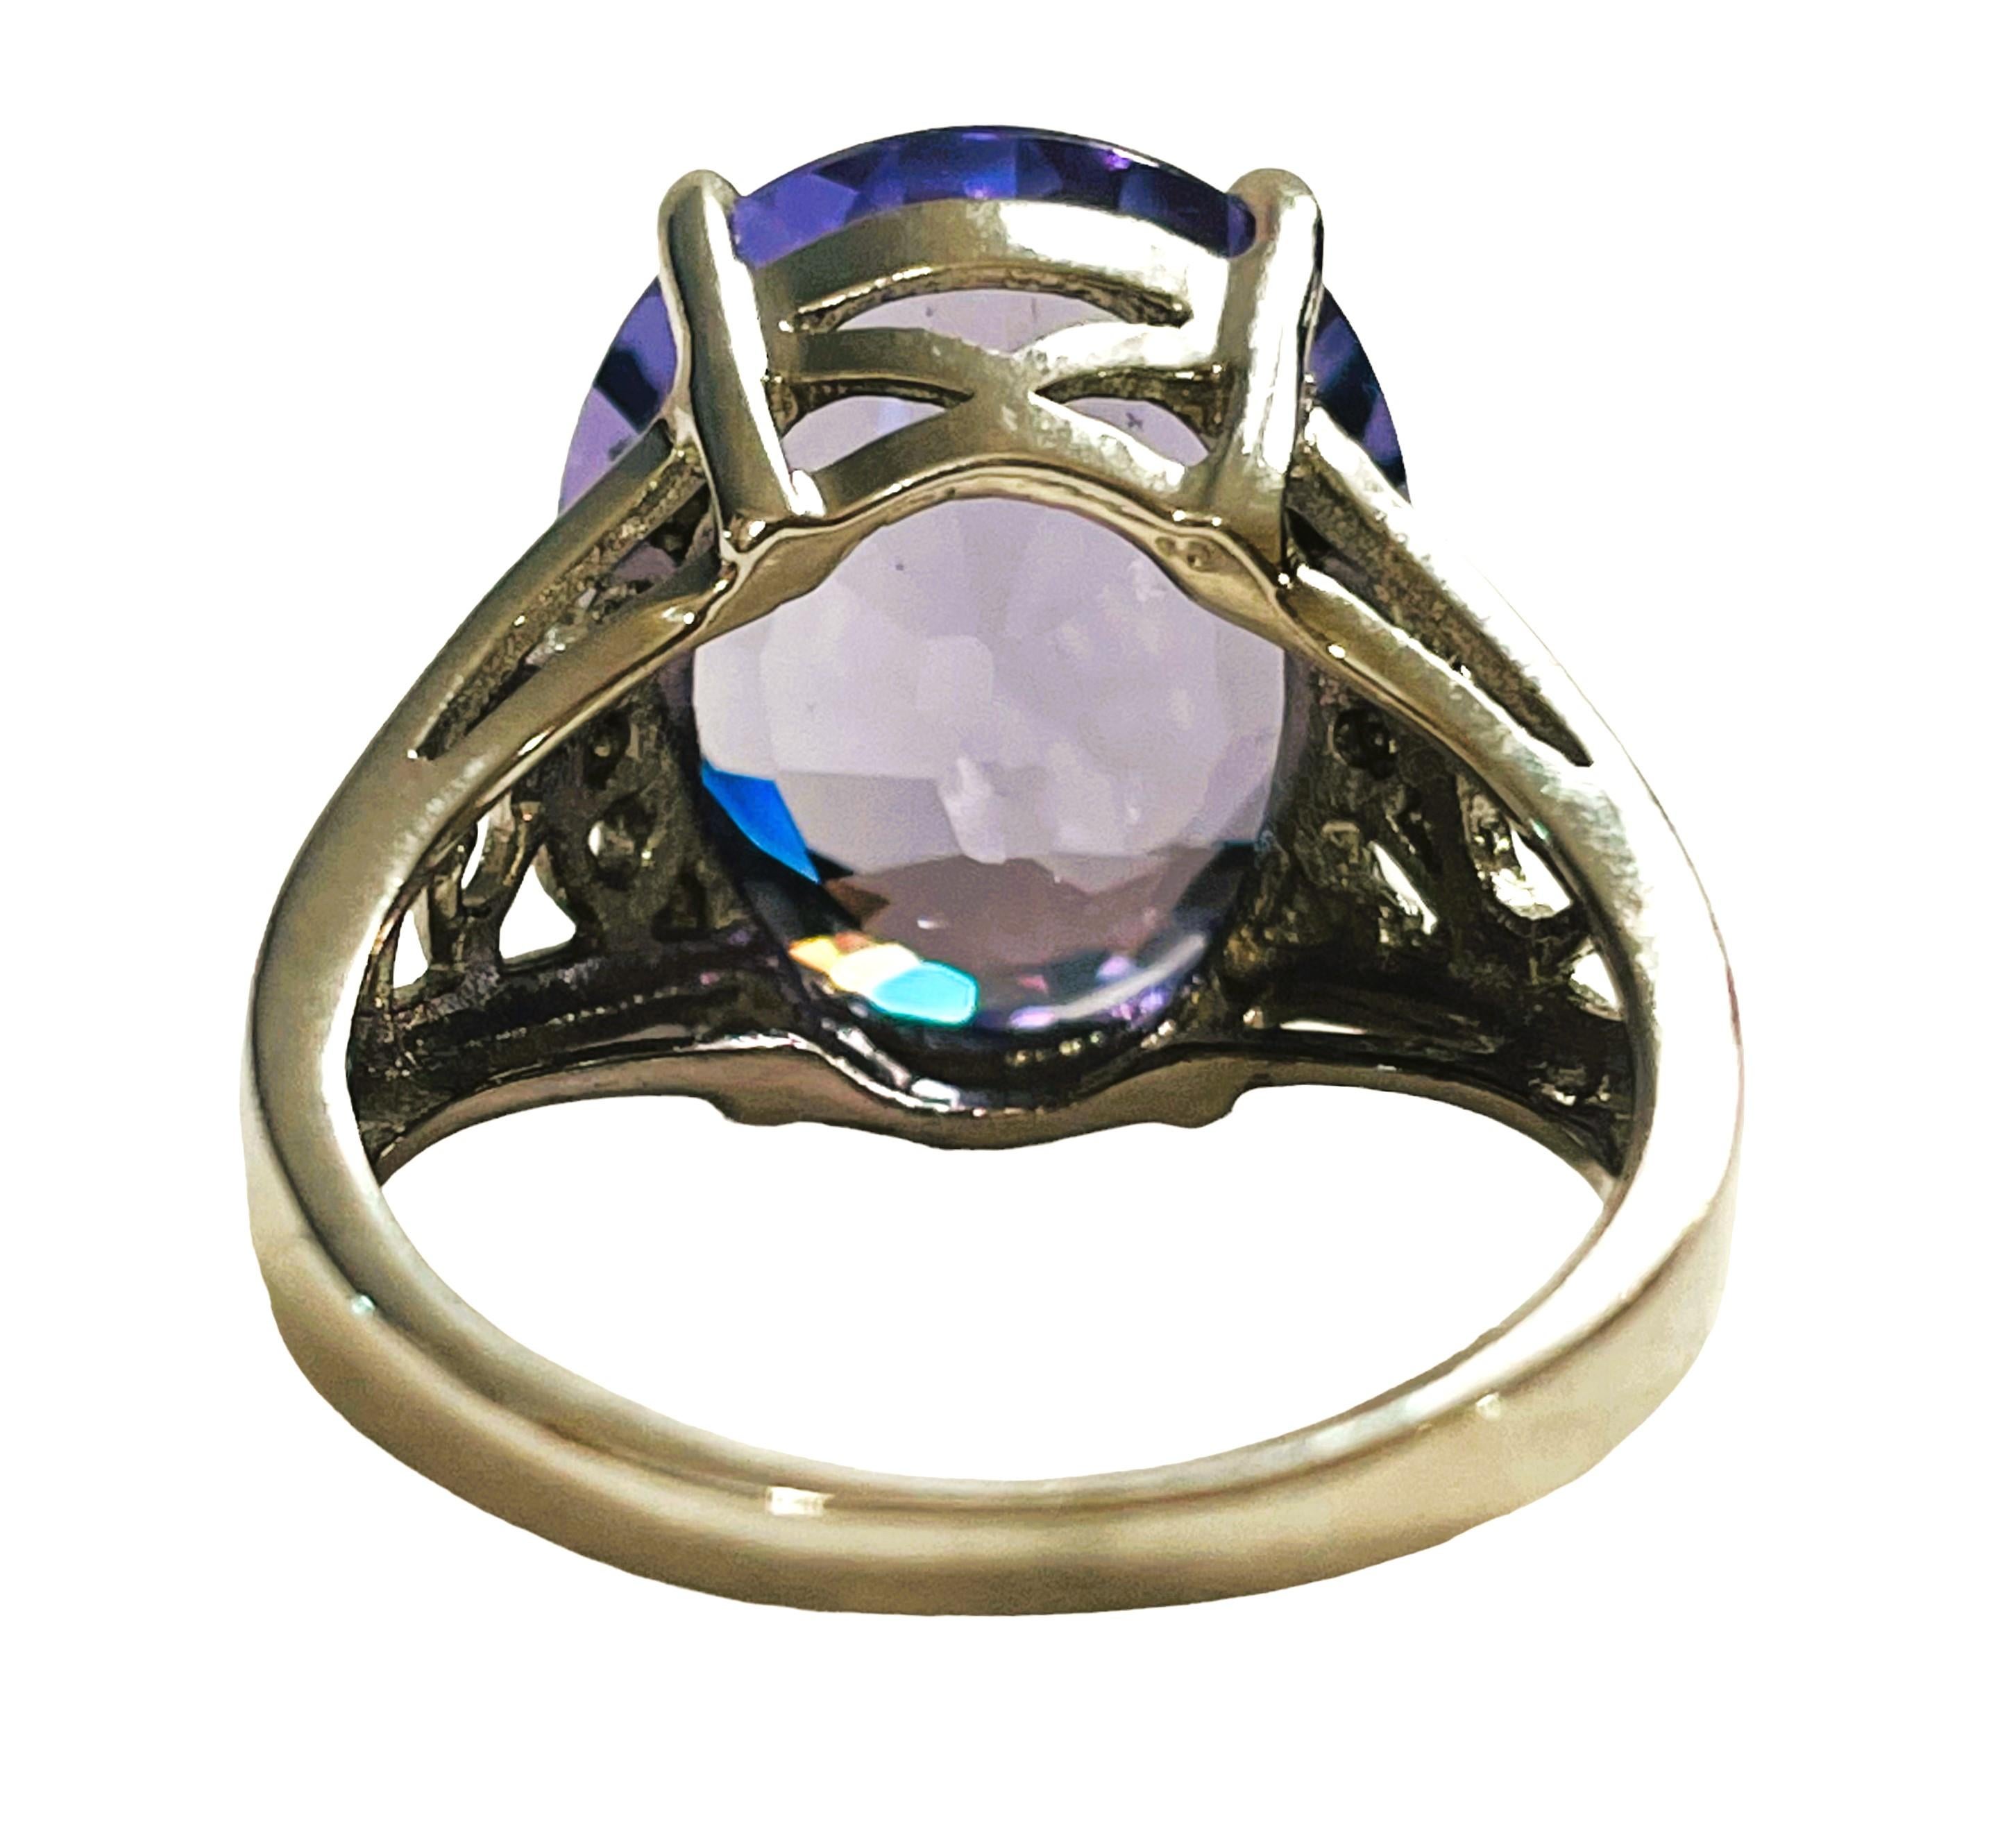 Oval Cut New Free of Inclusions African Blue Purple Spinel & Sapphire Sterling Ring 5.75